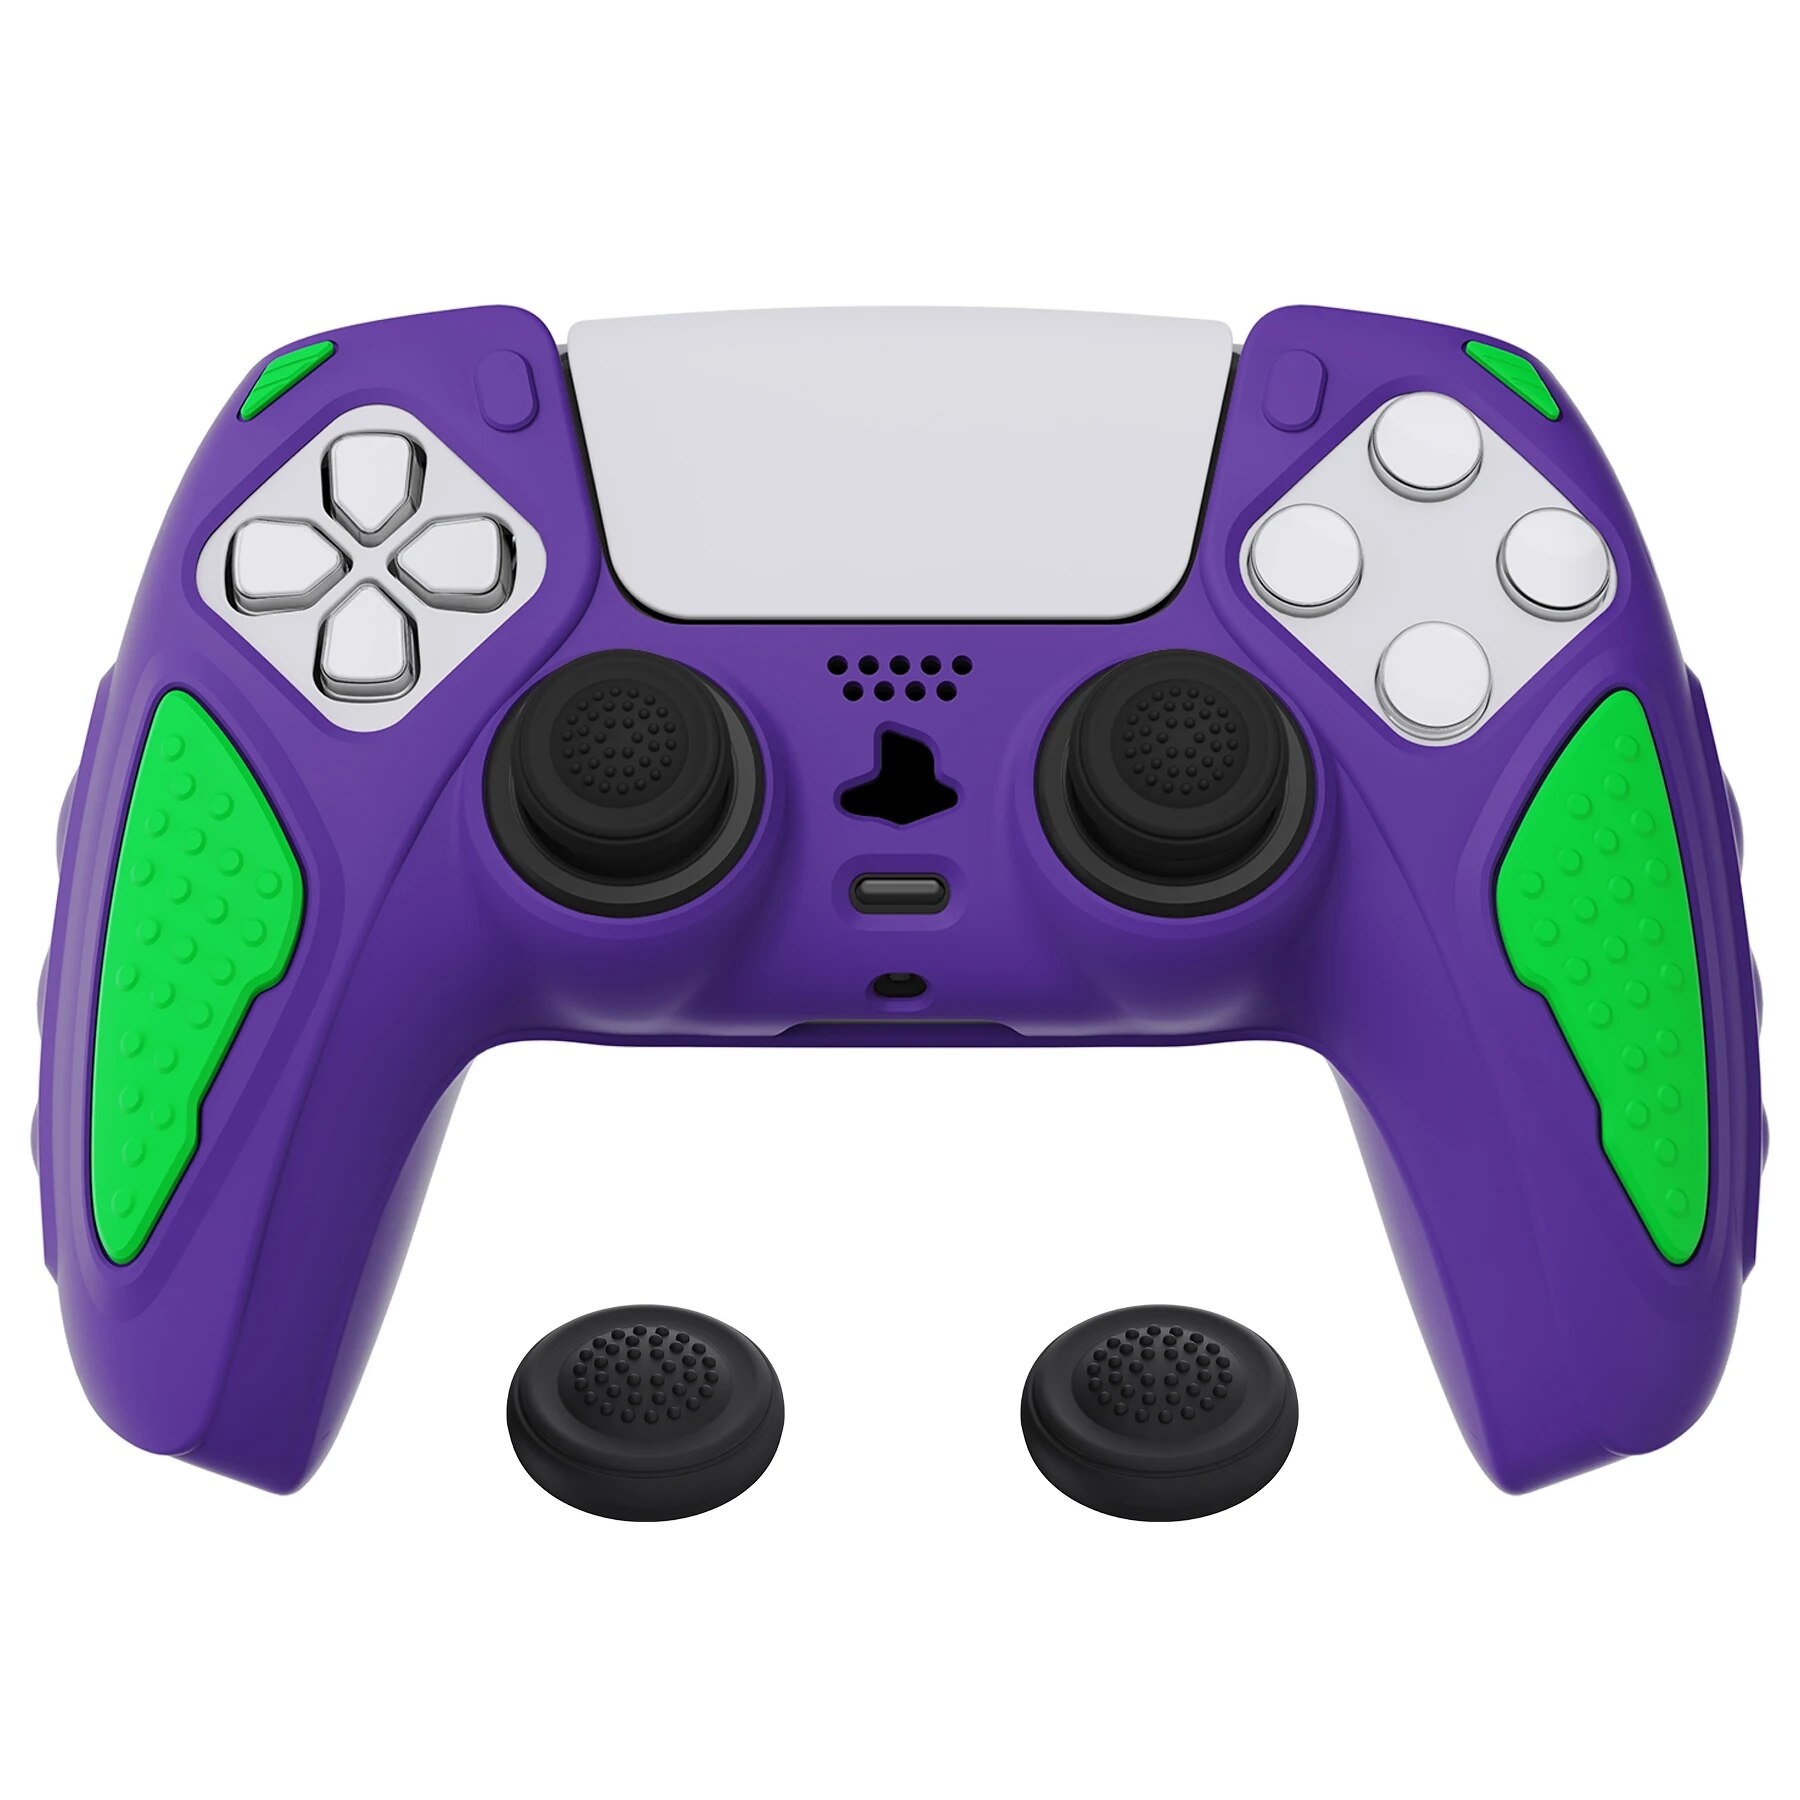 【Storewide Sale】 Playvital Knight Edition Anti-Slip Silicone Cover Skin For Ps5 Controller Case With Thumb Grip - Neon Genesis Purple Green